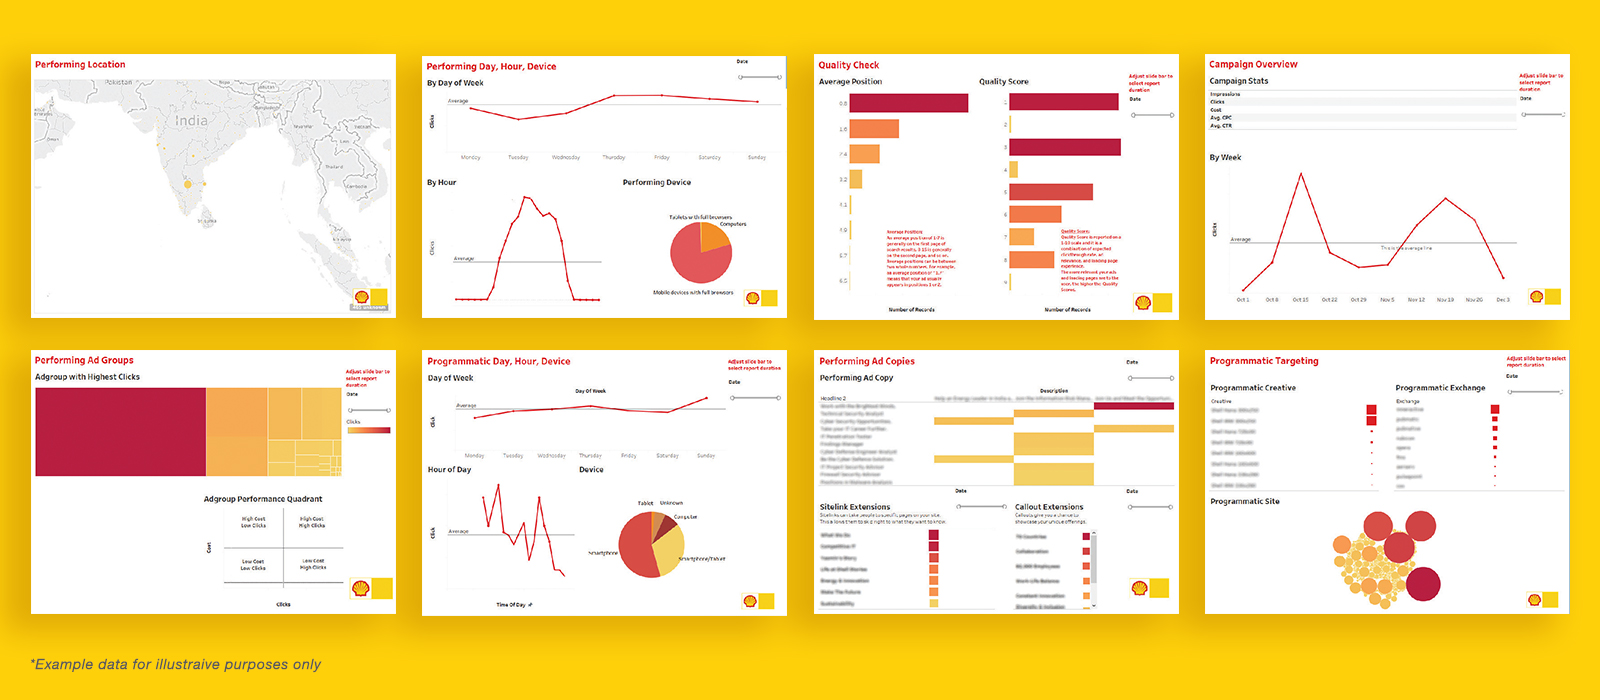 Real-time campaign analytics dashboard for Shell